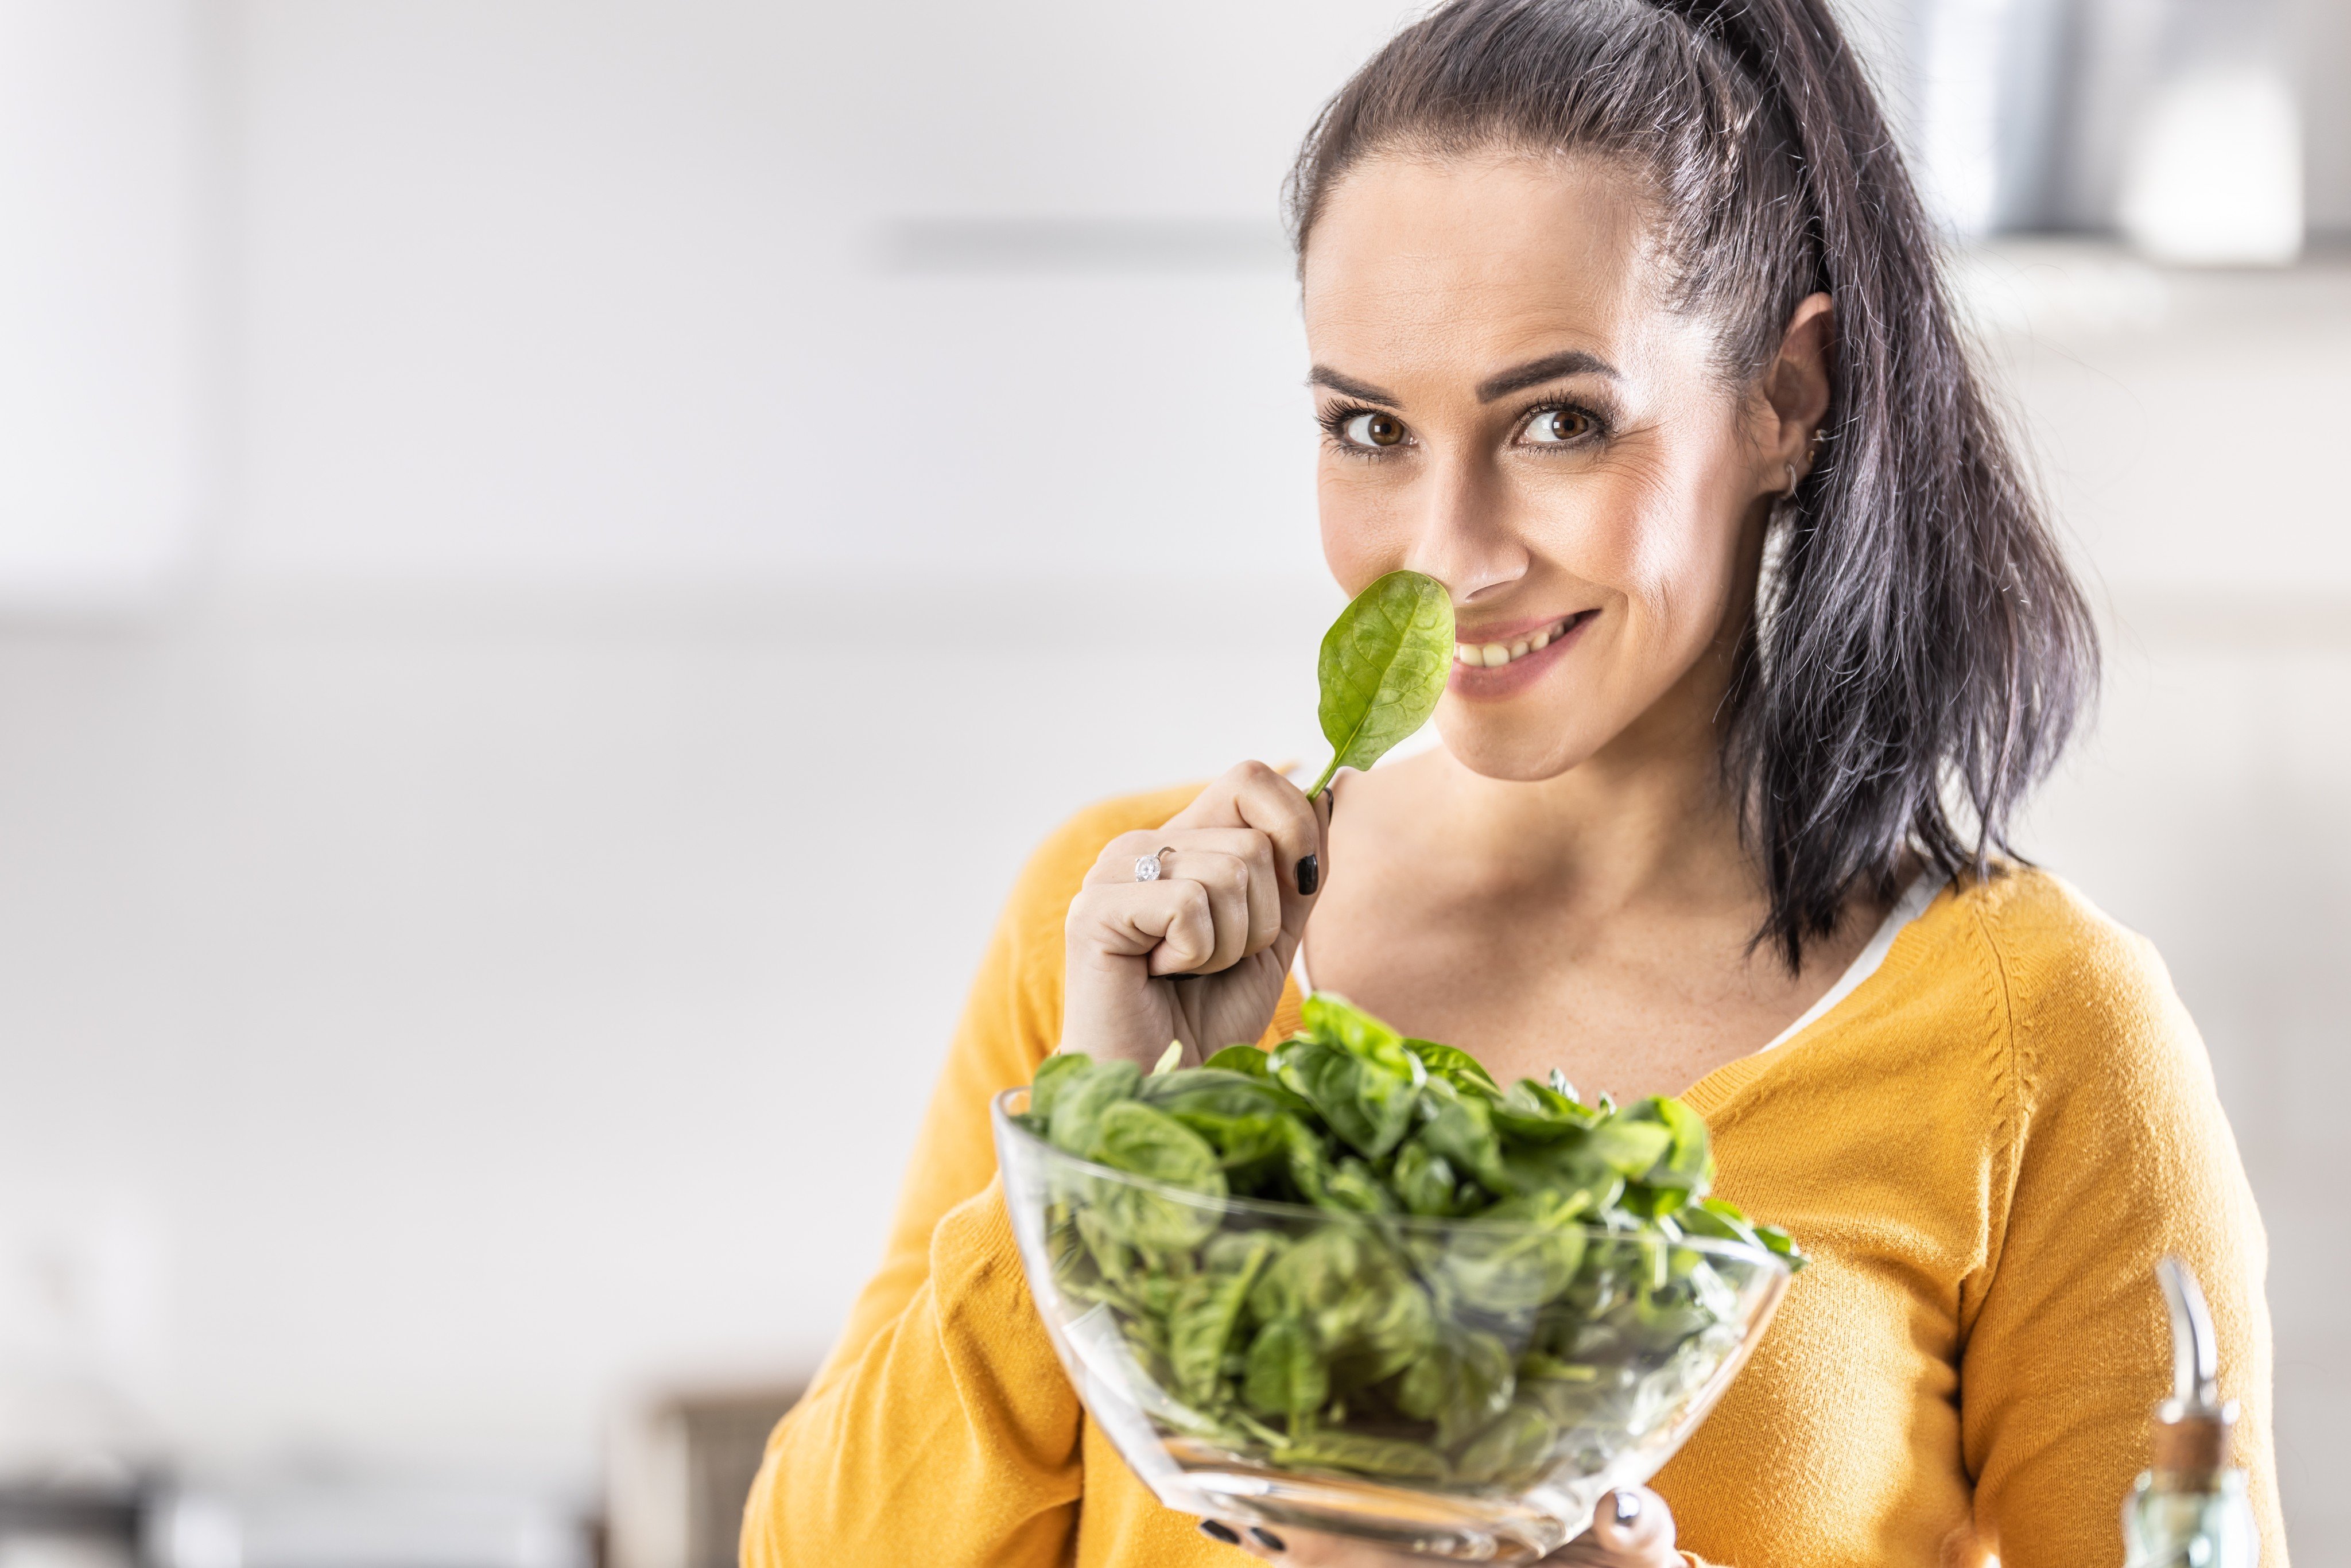 Spinach is full of health benefits regardless of how you like to prepare it, one expert says. Among all the leafy green powerhouses, it packs a wallop in terms of vitamins, fibre, magnesium, potassium and iron. Photo: Shutterstock